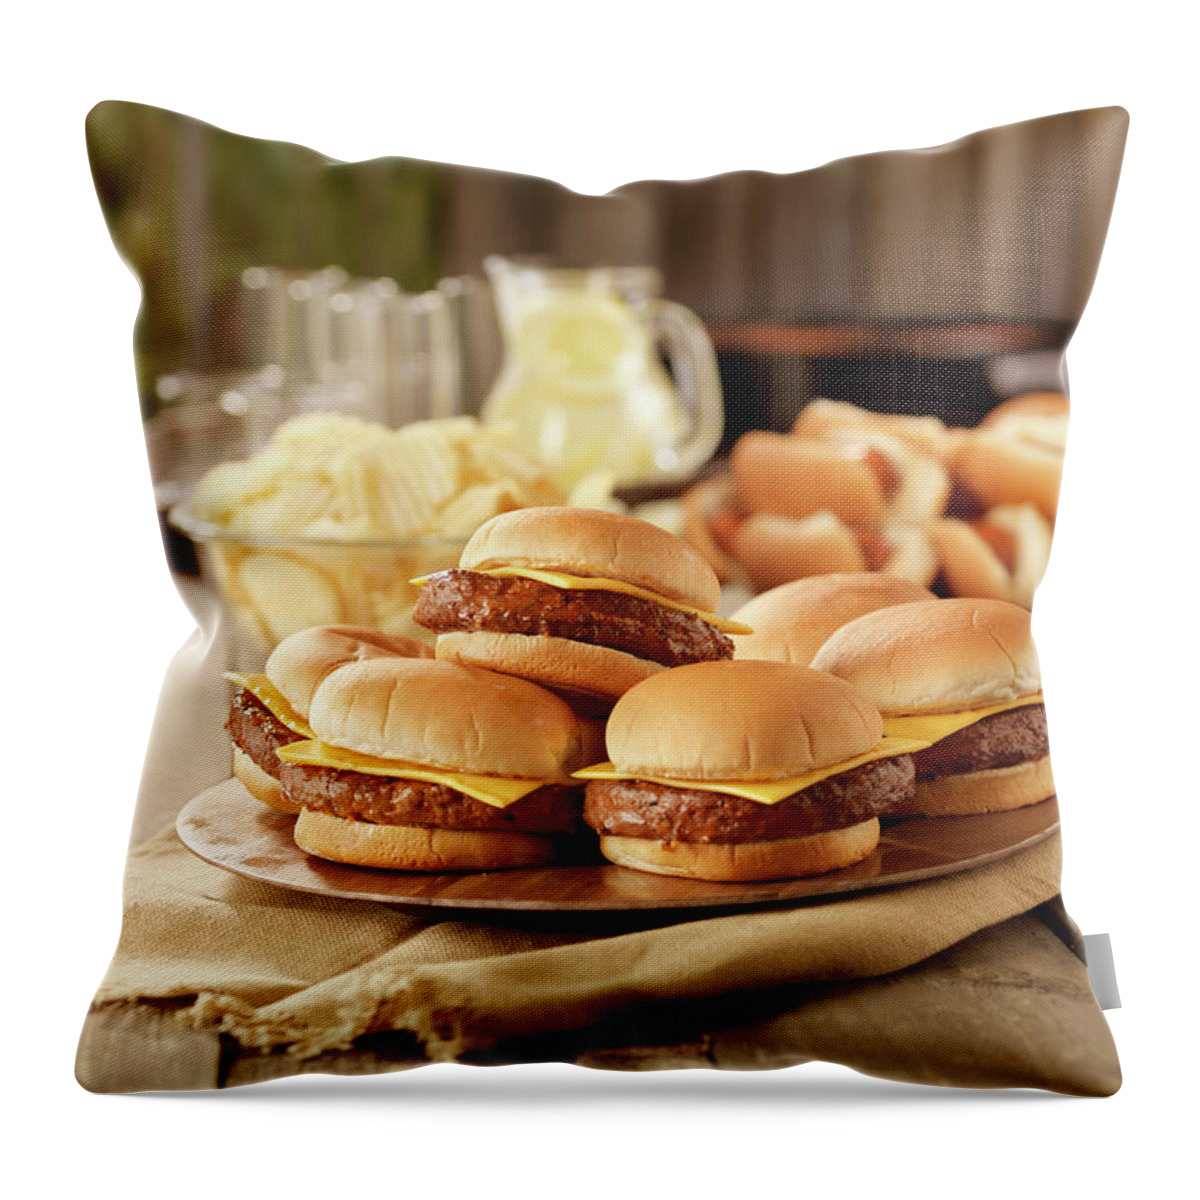 Cheese Throw Pillow featuring the photograph Bbq Cheese Burgers At A Picnic by Lauripatterson